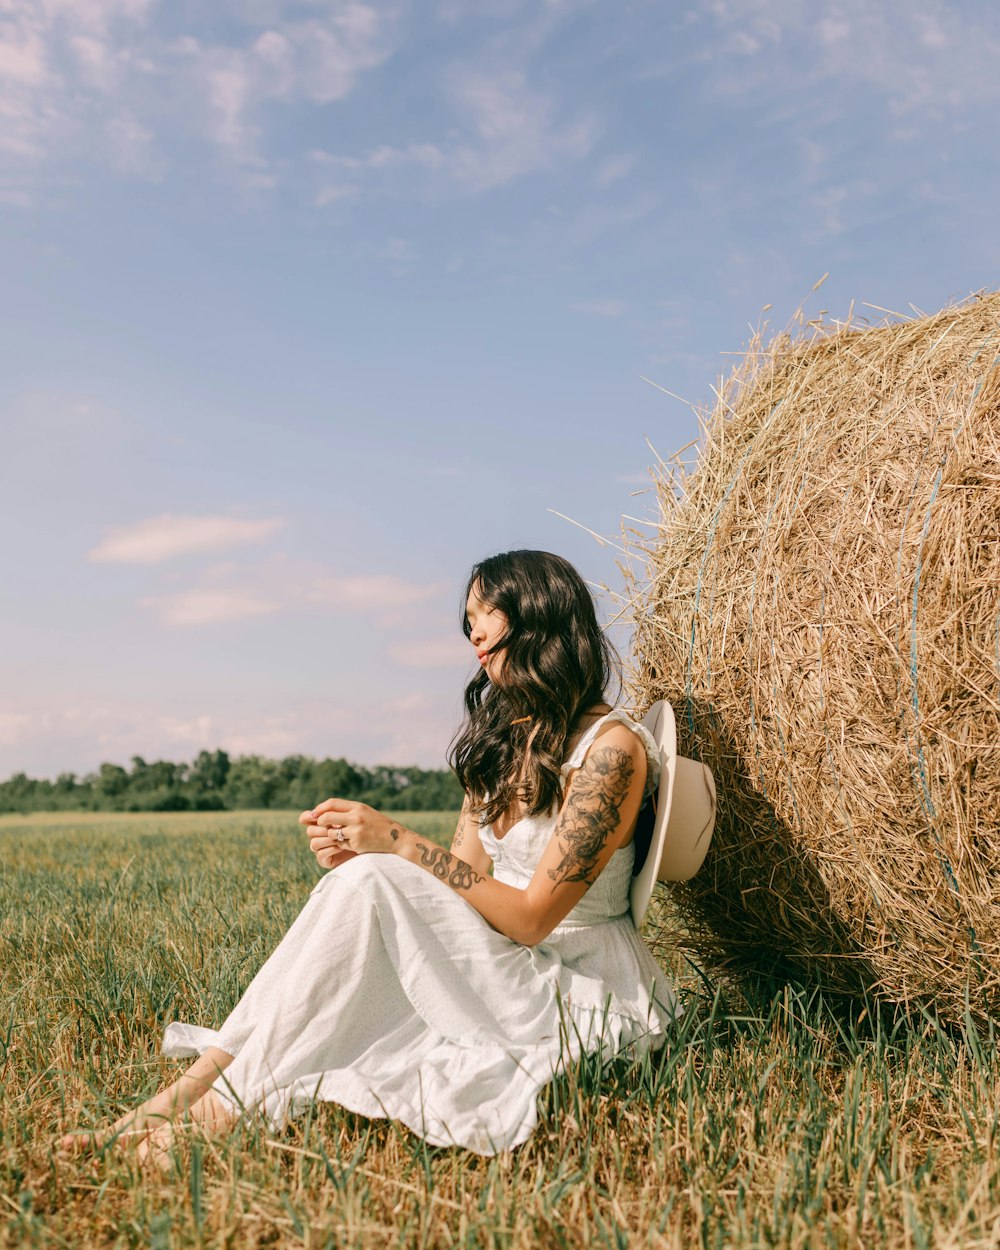 a person sitting in a field of hay